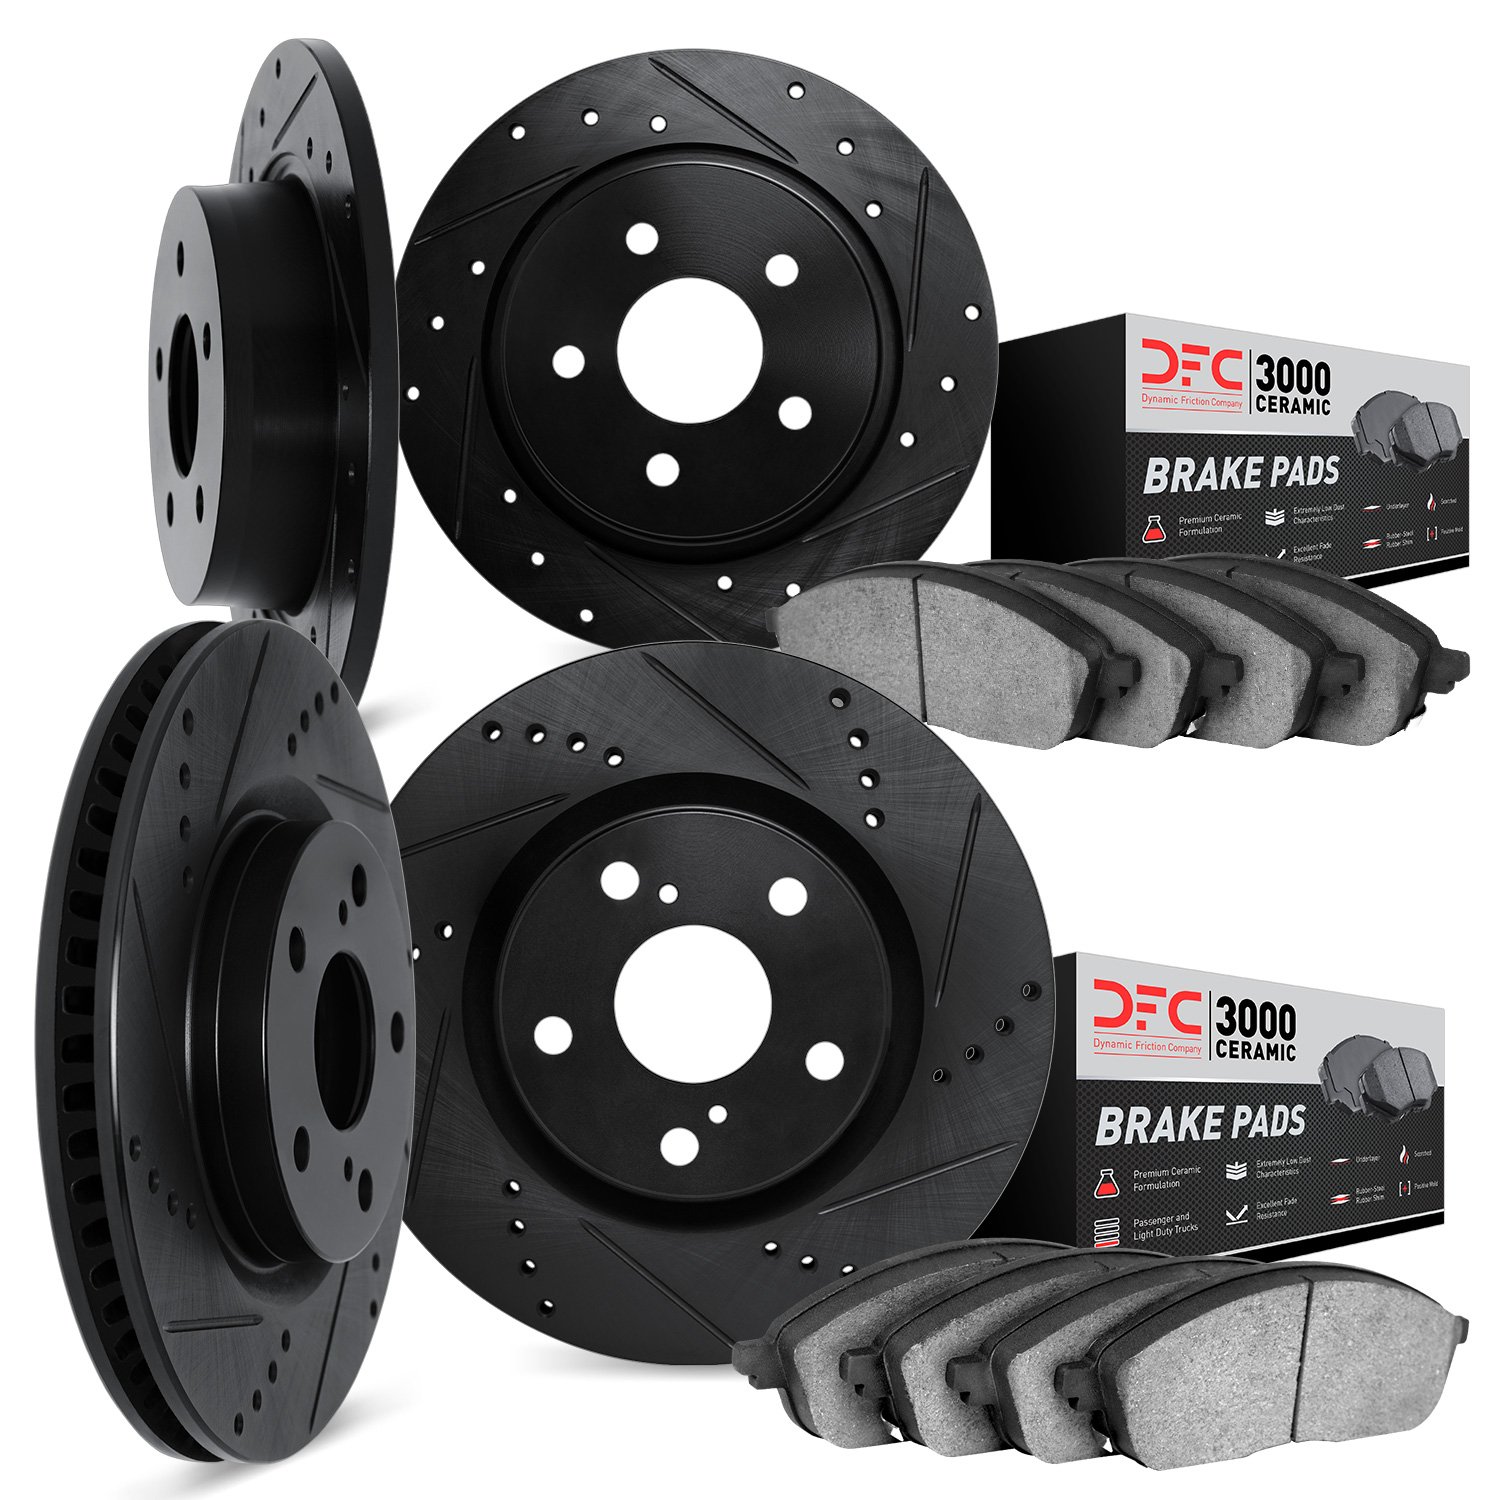 8304-39028 Drilled/Slotted Brake Rotors with 3000-Series Ceramic Brake Pads Kit [Black], Fits Select Mopar, Position: Front and